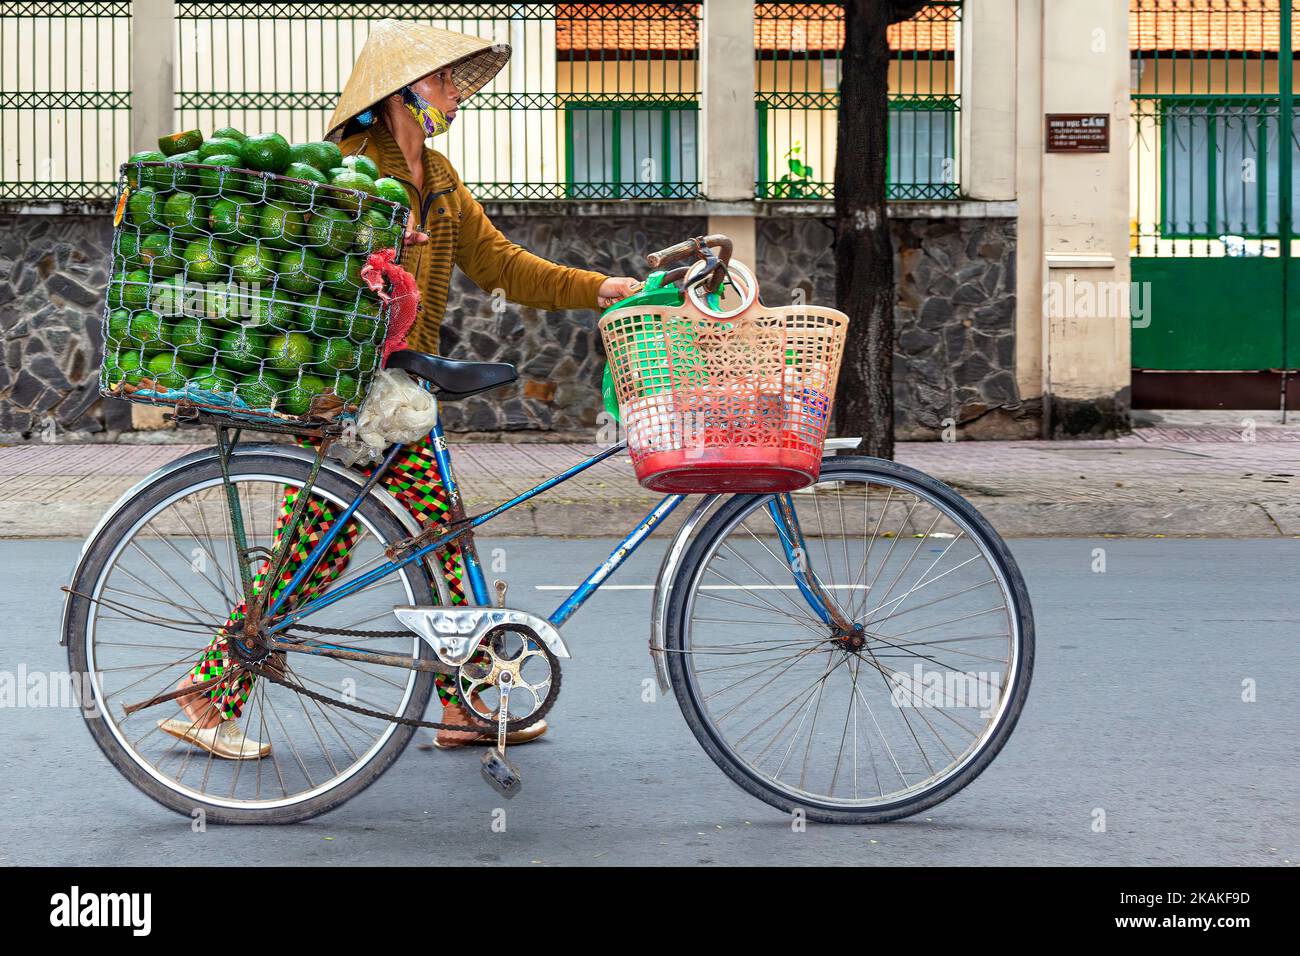 Vietnamese hawker wearing bamboo hat selling fruit from bicycle, Ho Chi Minh City, Vietnam Stock Photo